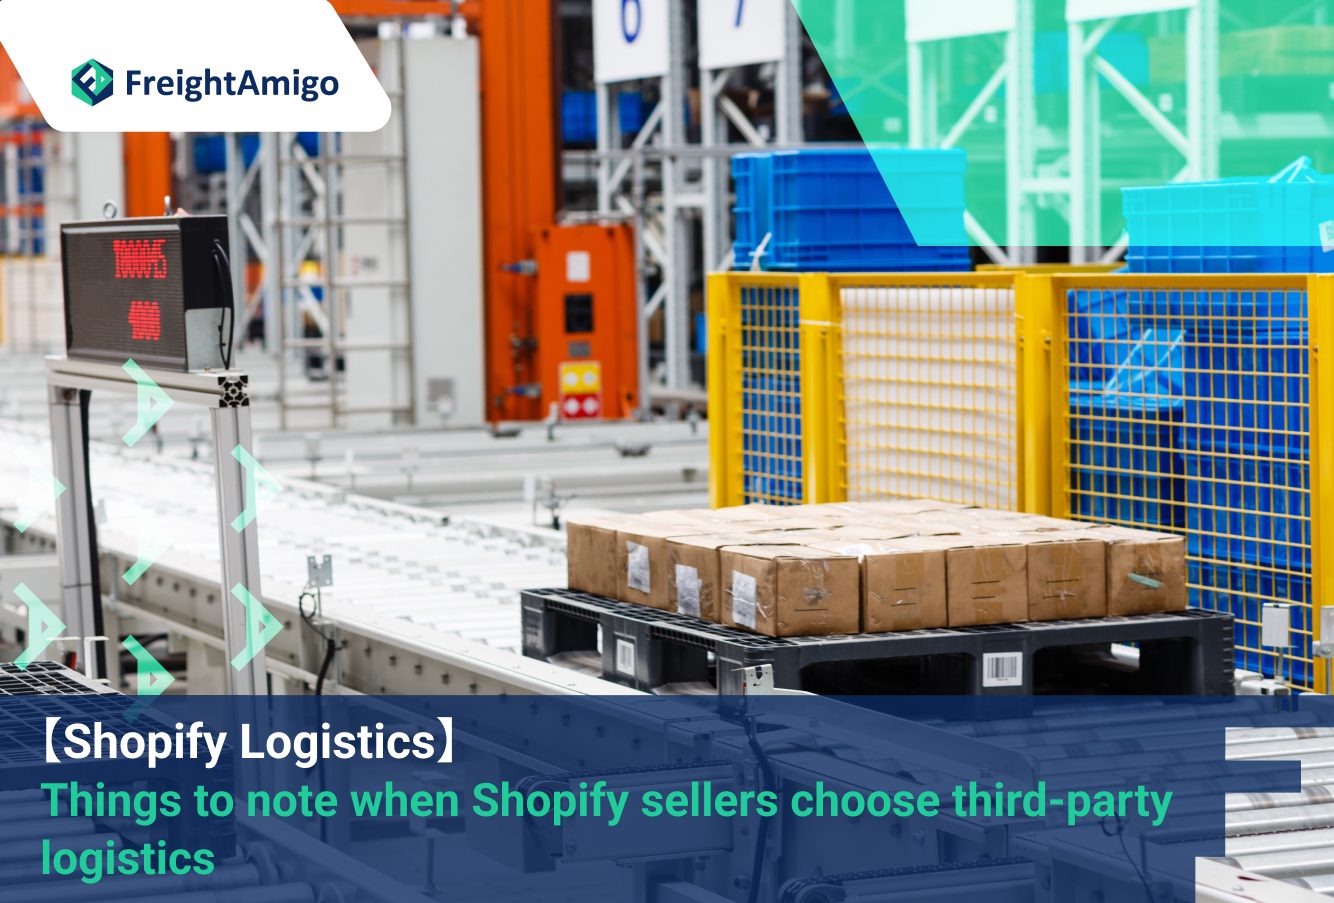 Shopify Logistics: Things to note when Shopify sellers choose third-party logistics